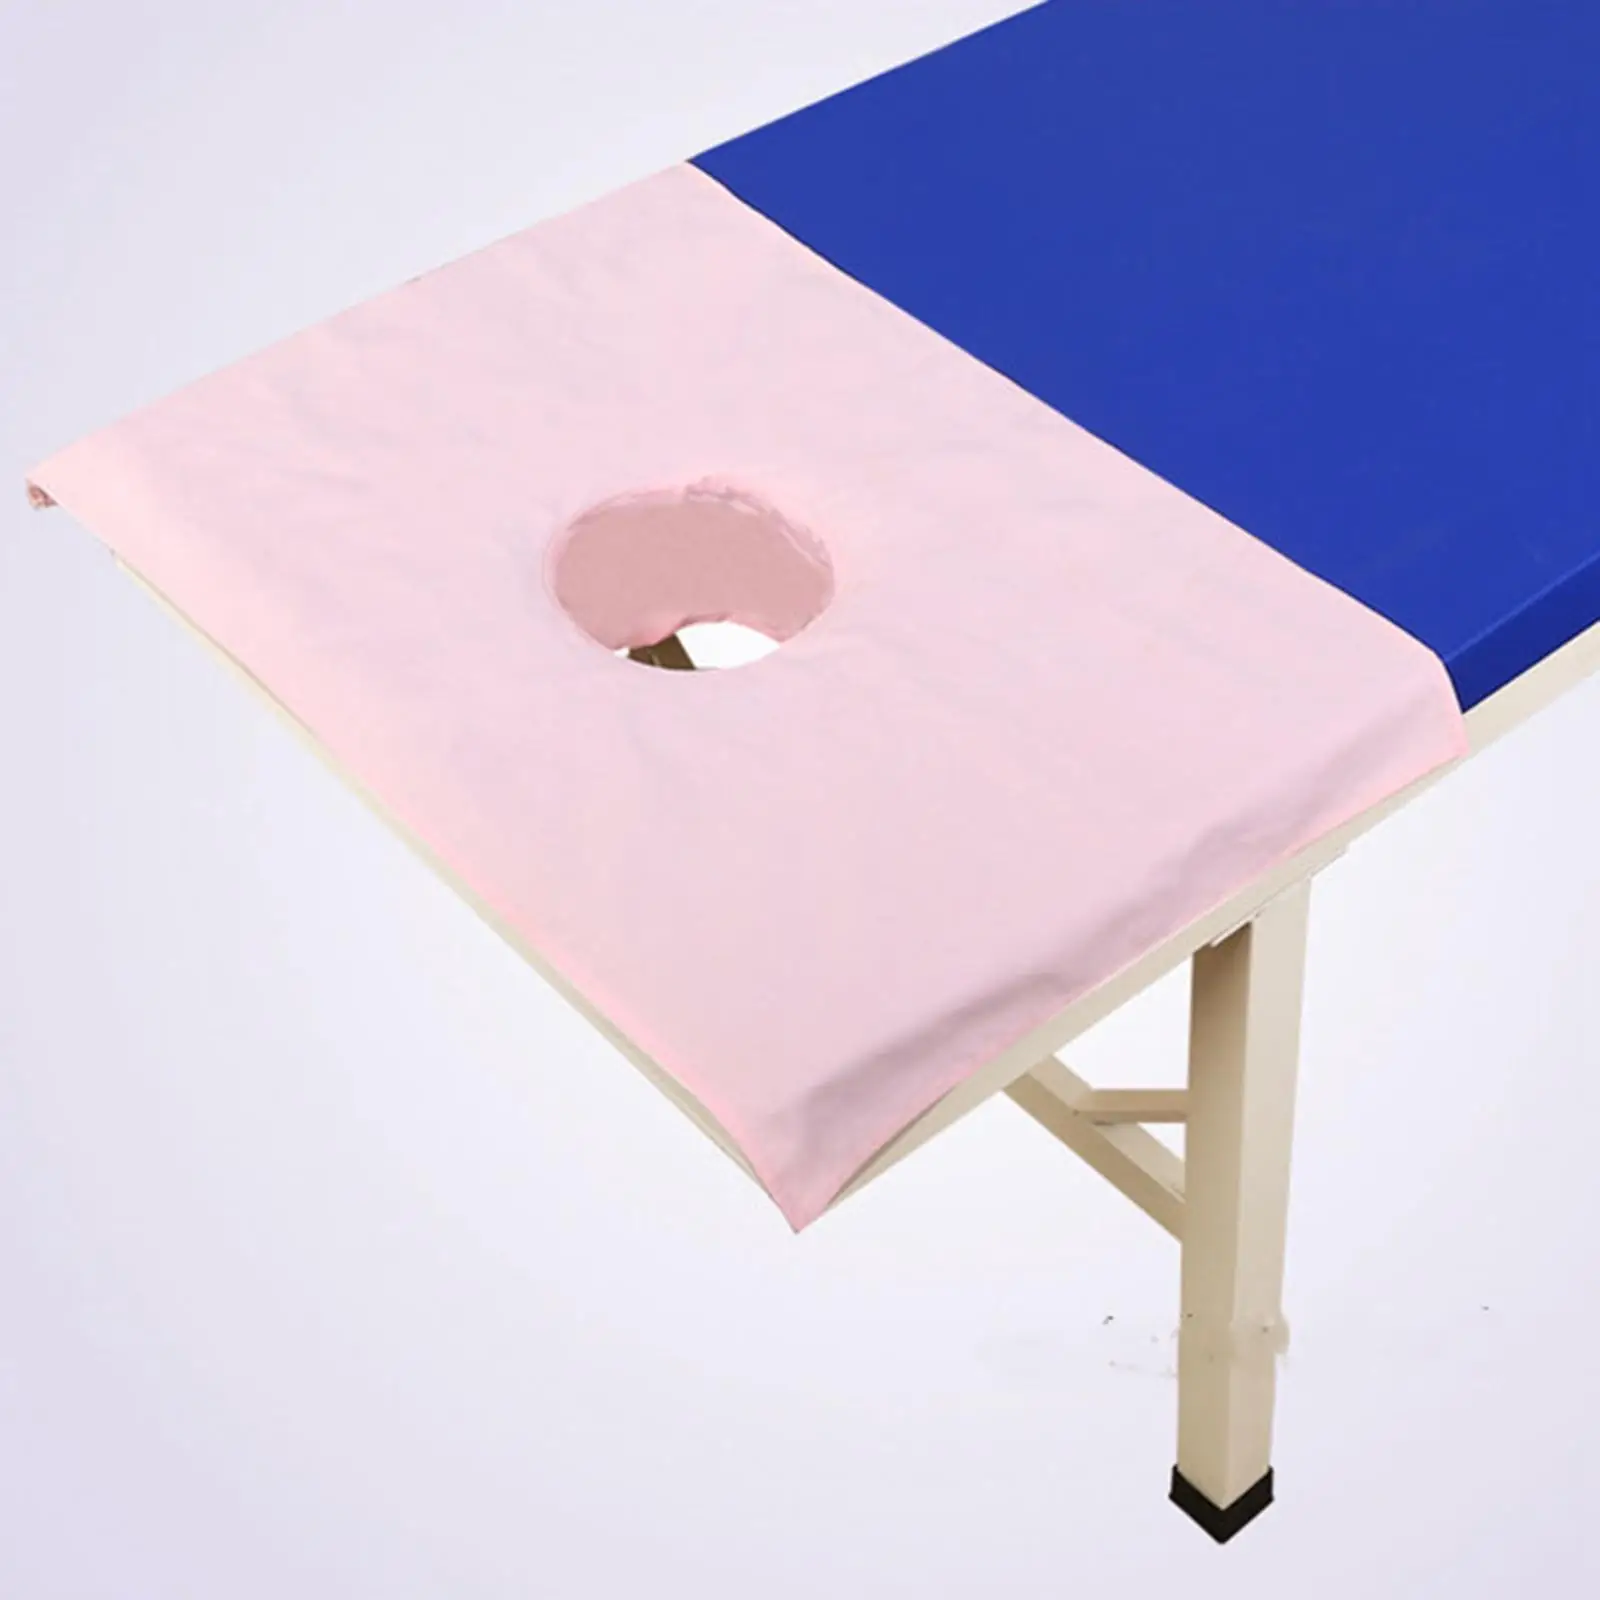 Massage Table Cover Sheet with Face Hole Massage Towel Cotton Massage Bed Sheet Sectional Towelling Cover for Massage Tables